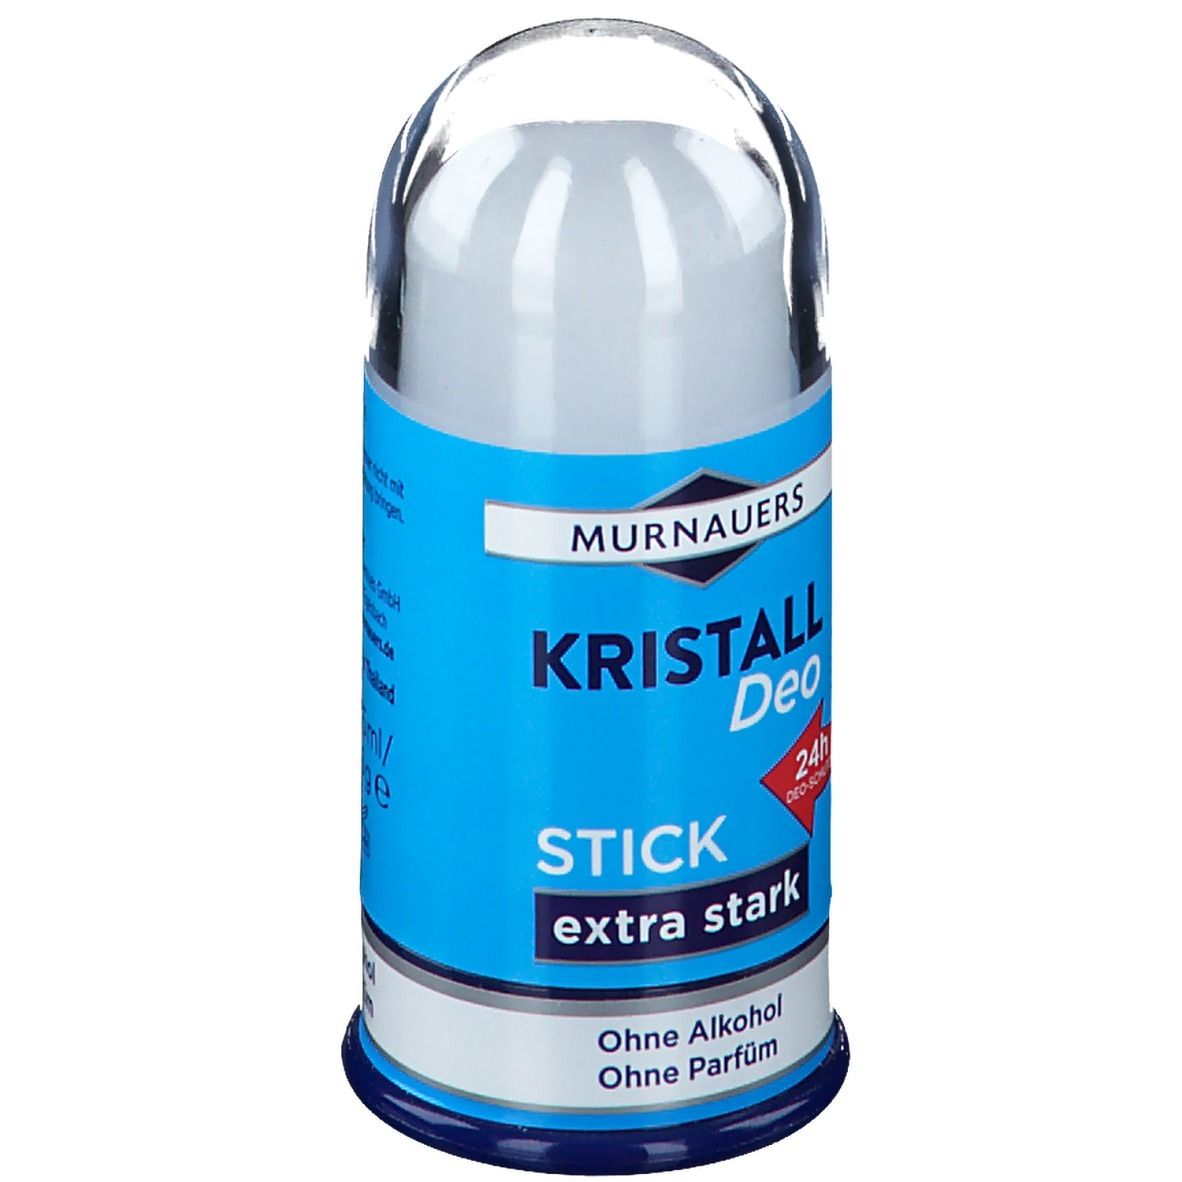 MURNAUERS Kristall Deo Stick extra fort